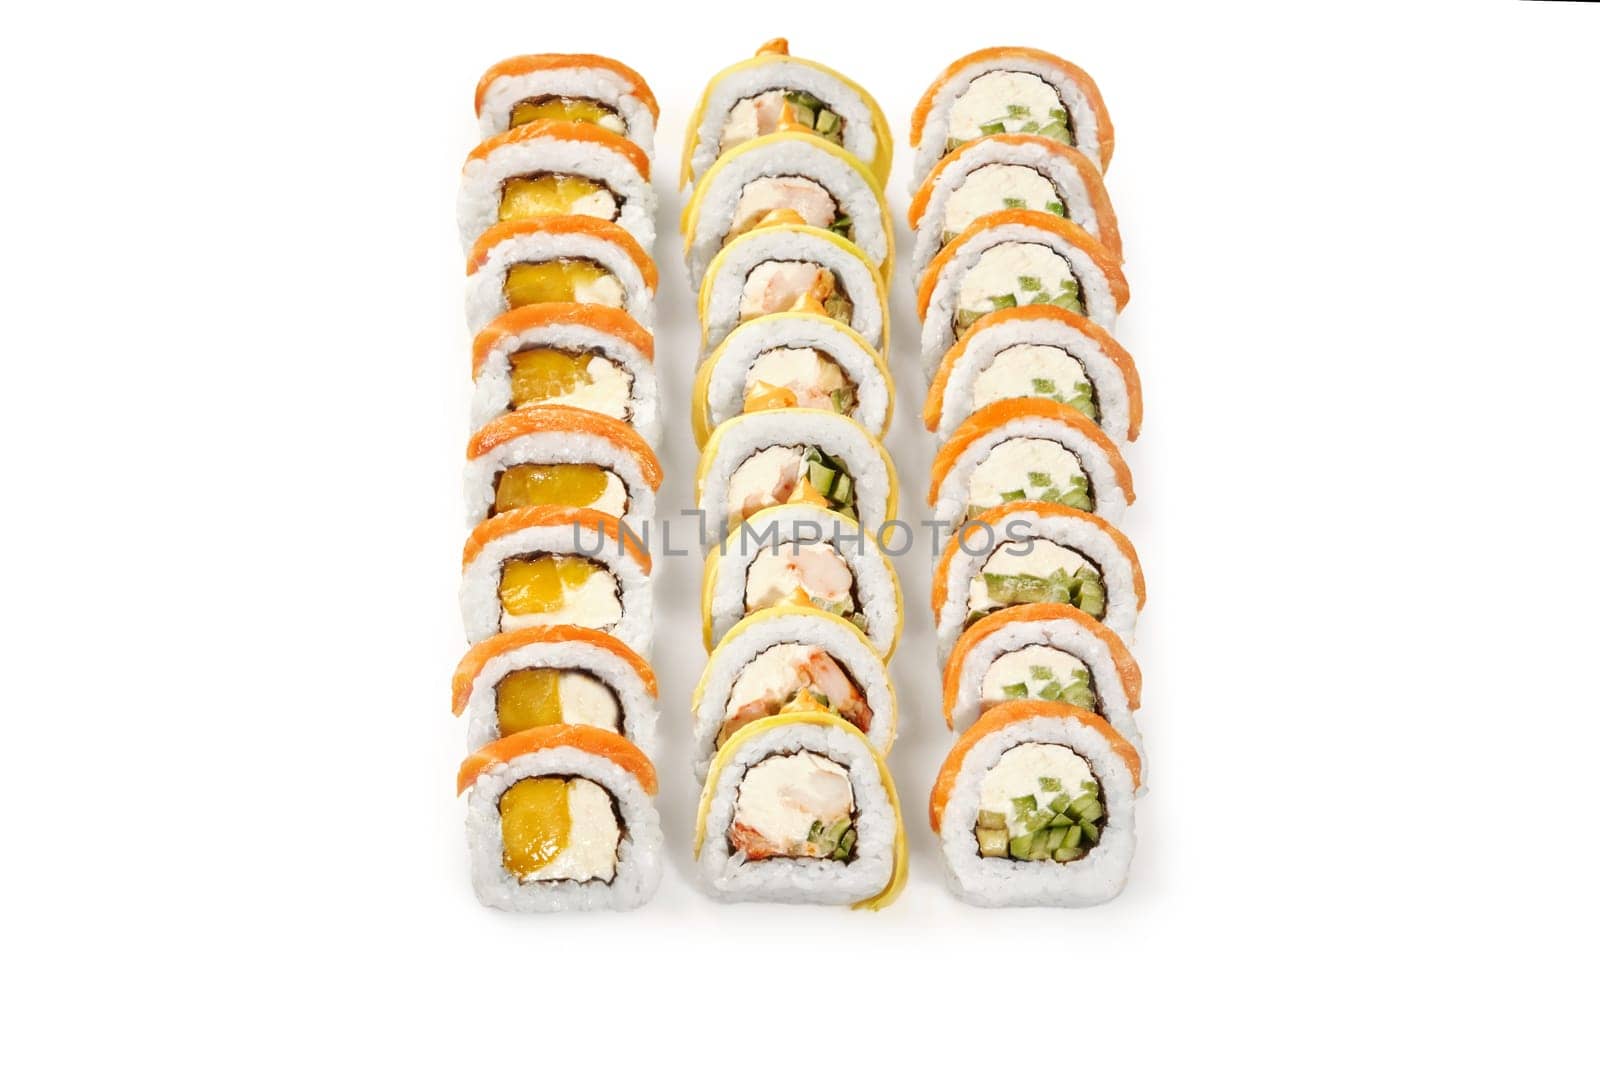 Set of delicious uramaki rolls with salmon, crab, cheese and mango arranged on white background. Japanese fusion cuisine. Sushi bar menu concept